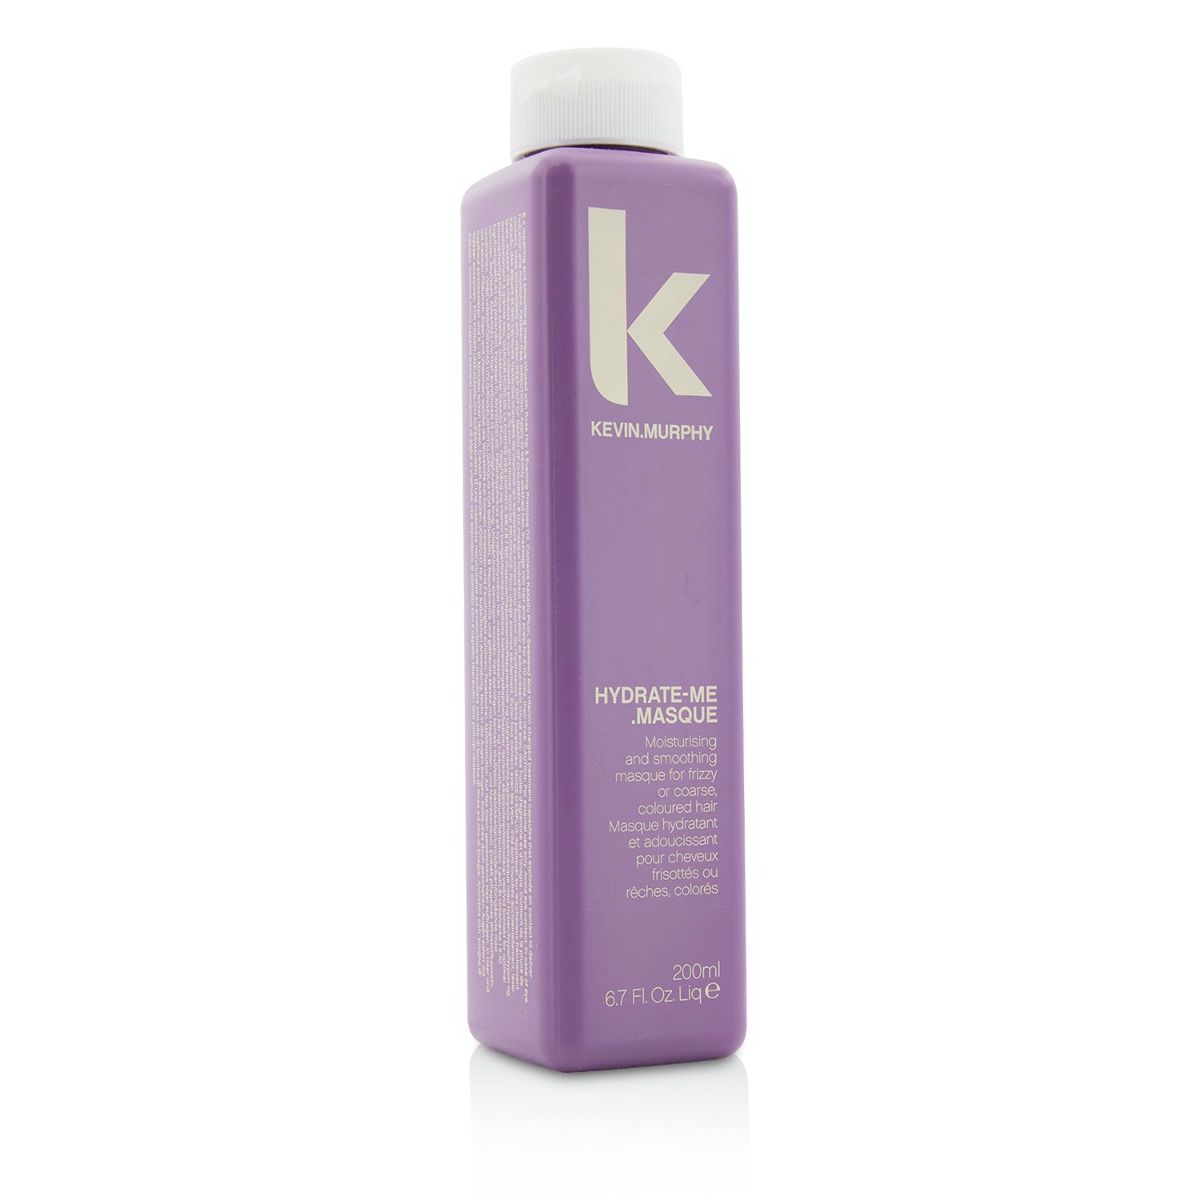 Hydrate-Me.Masque (Moisturizing and Smoothing Masque - For Frizzy or Coarse Coloured Hair) Kevin.Murphy Image